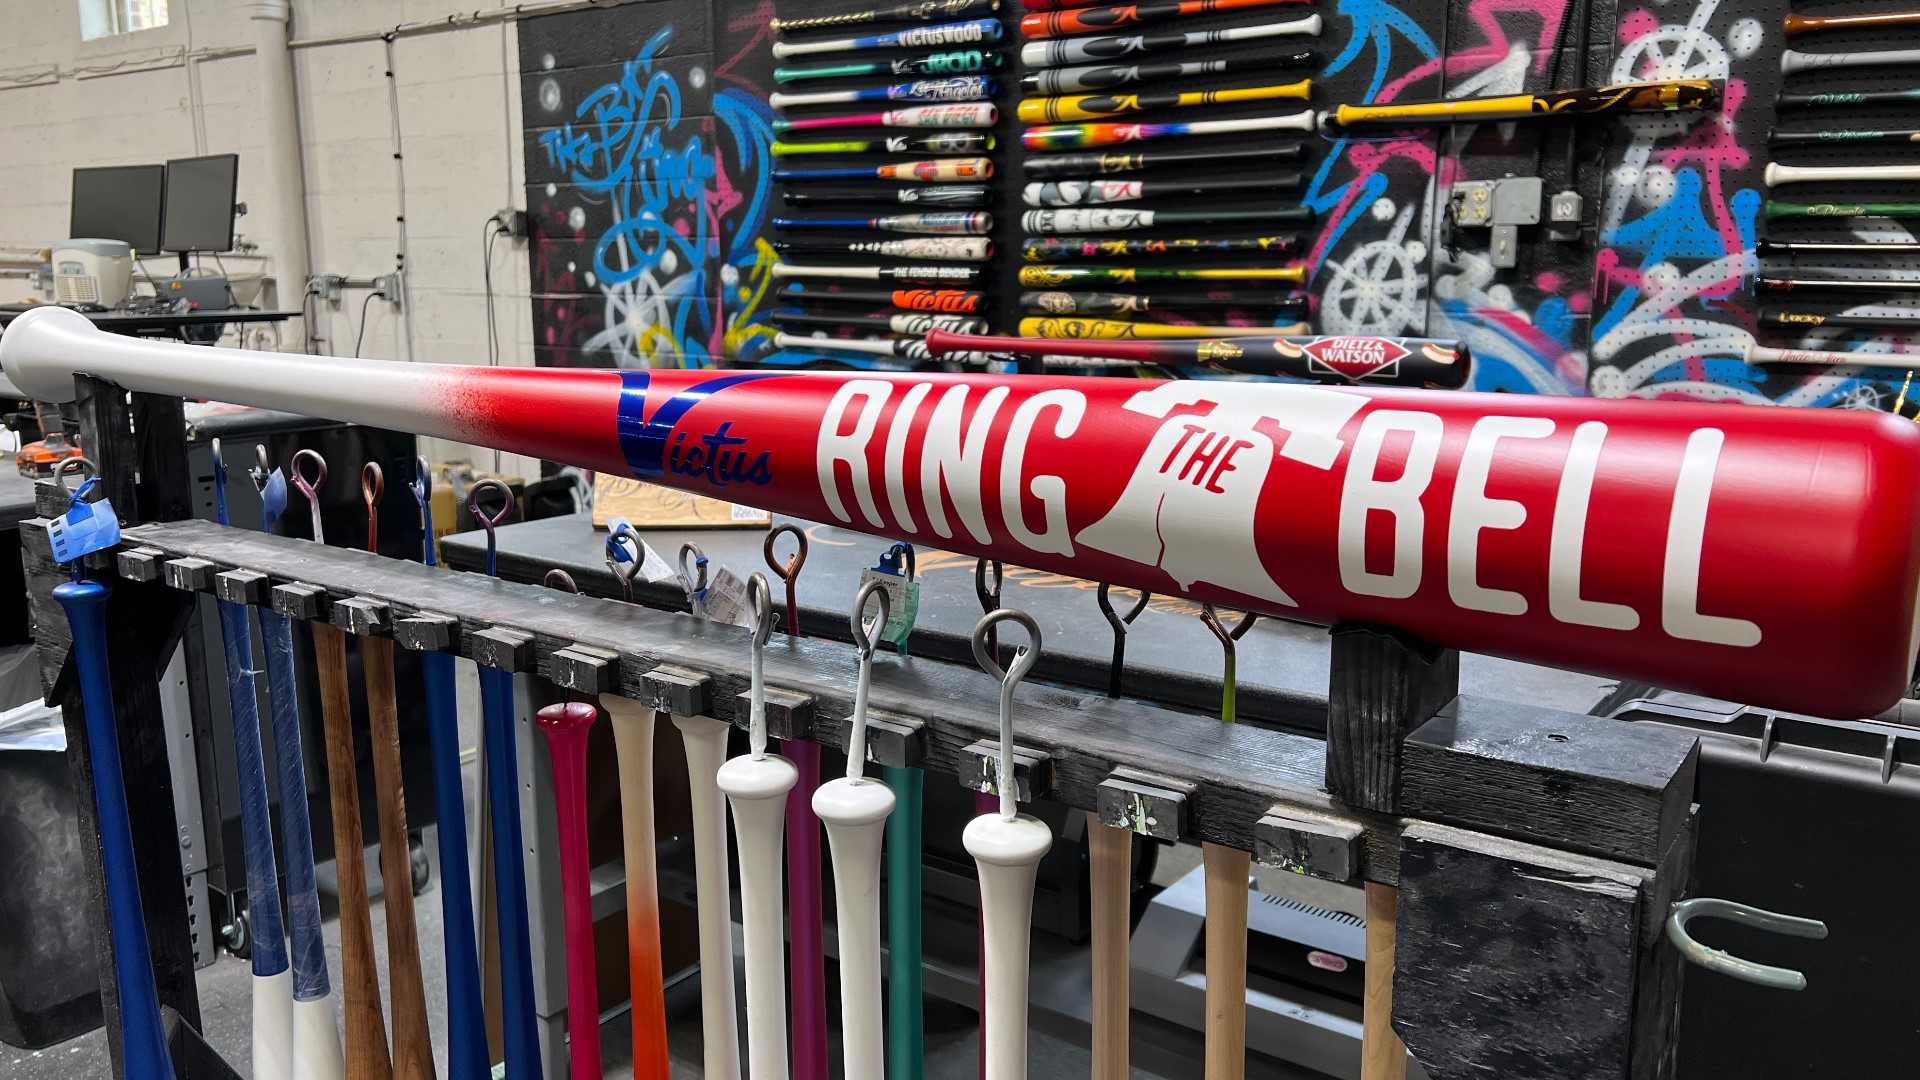 Ryan Engroff and Jared Smith founded Victus Sports, which has become the premiere bat maker for the MLB. But it all started in a Hummelstown garage.